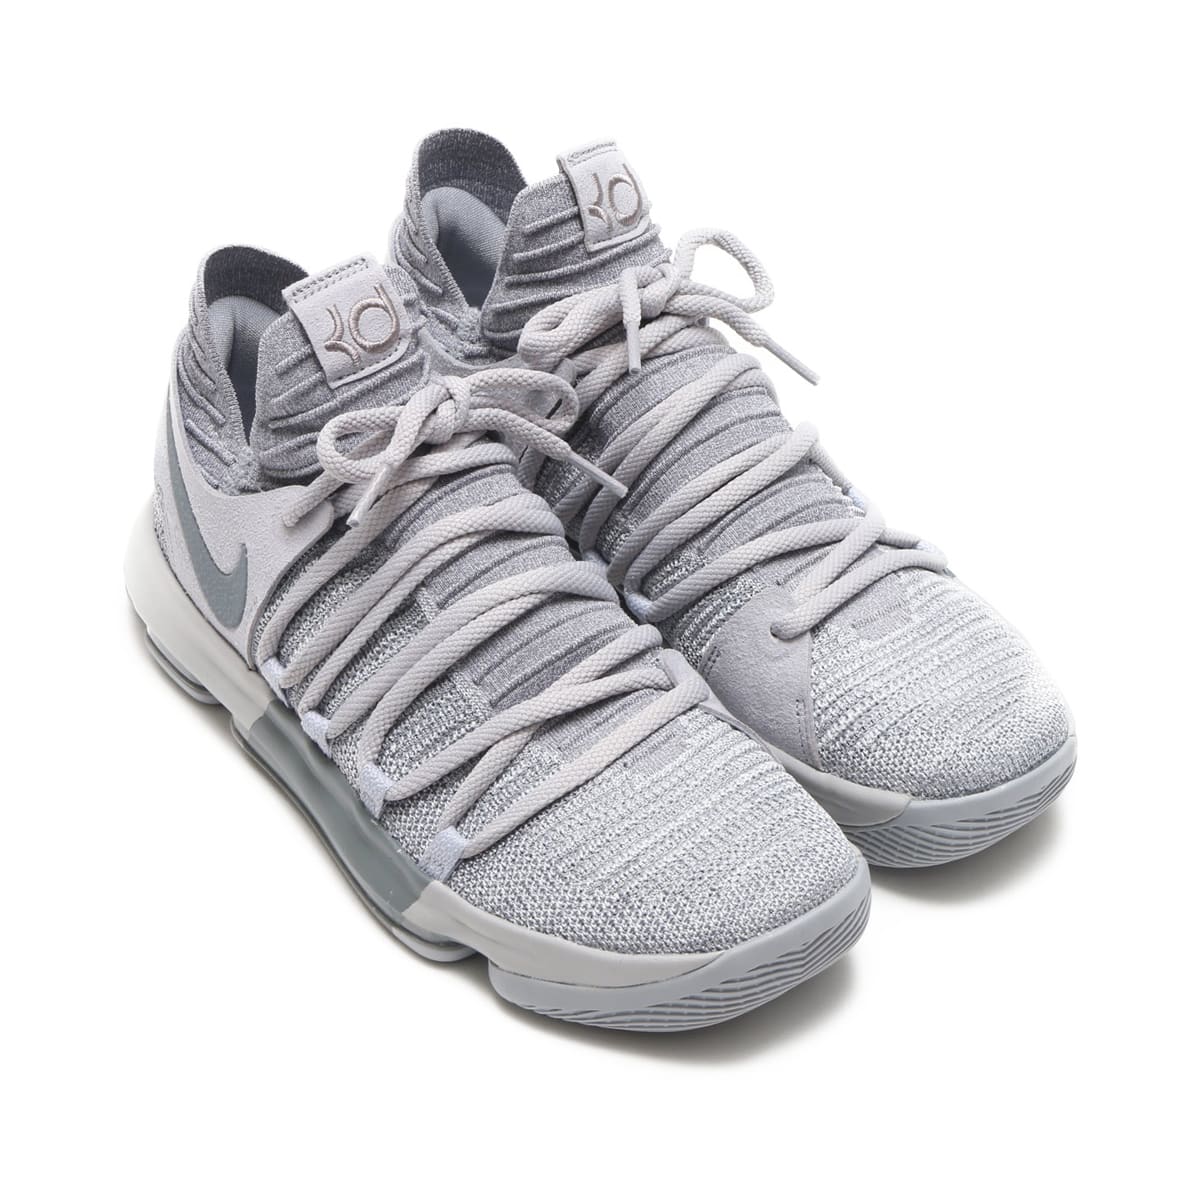 kd 10 wolf gray Kevin Durant shoes on sale